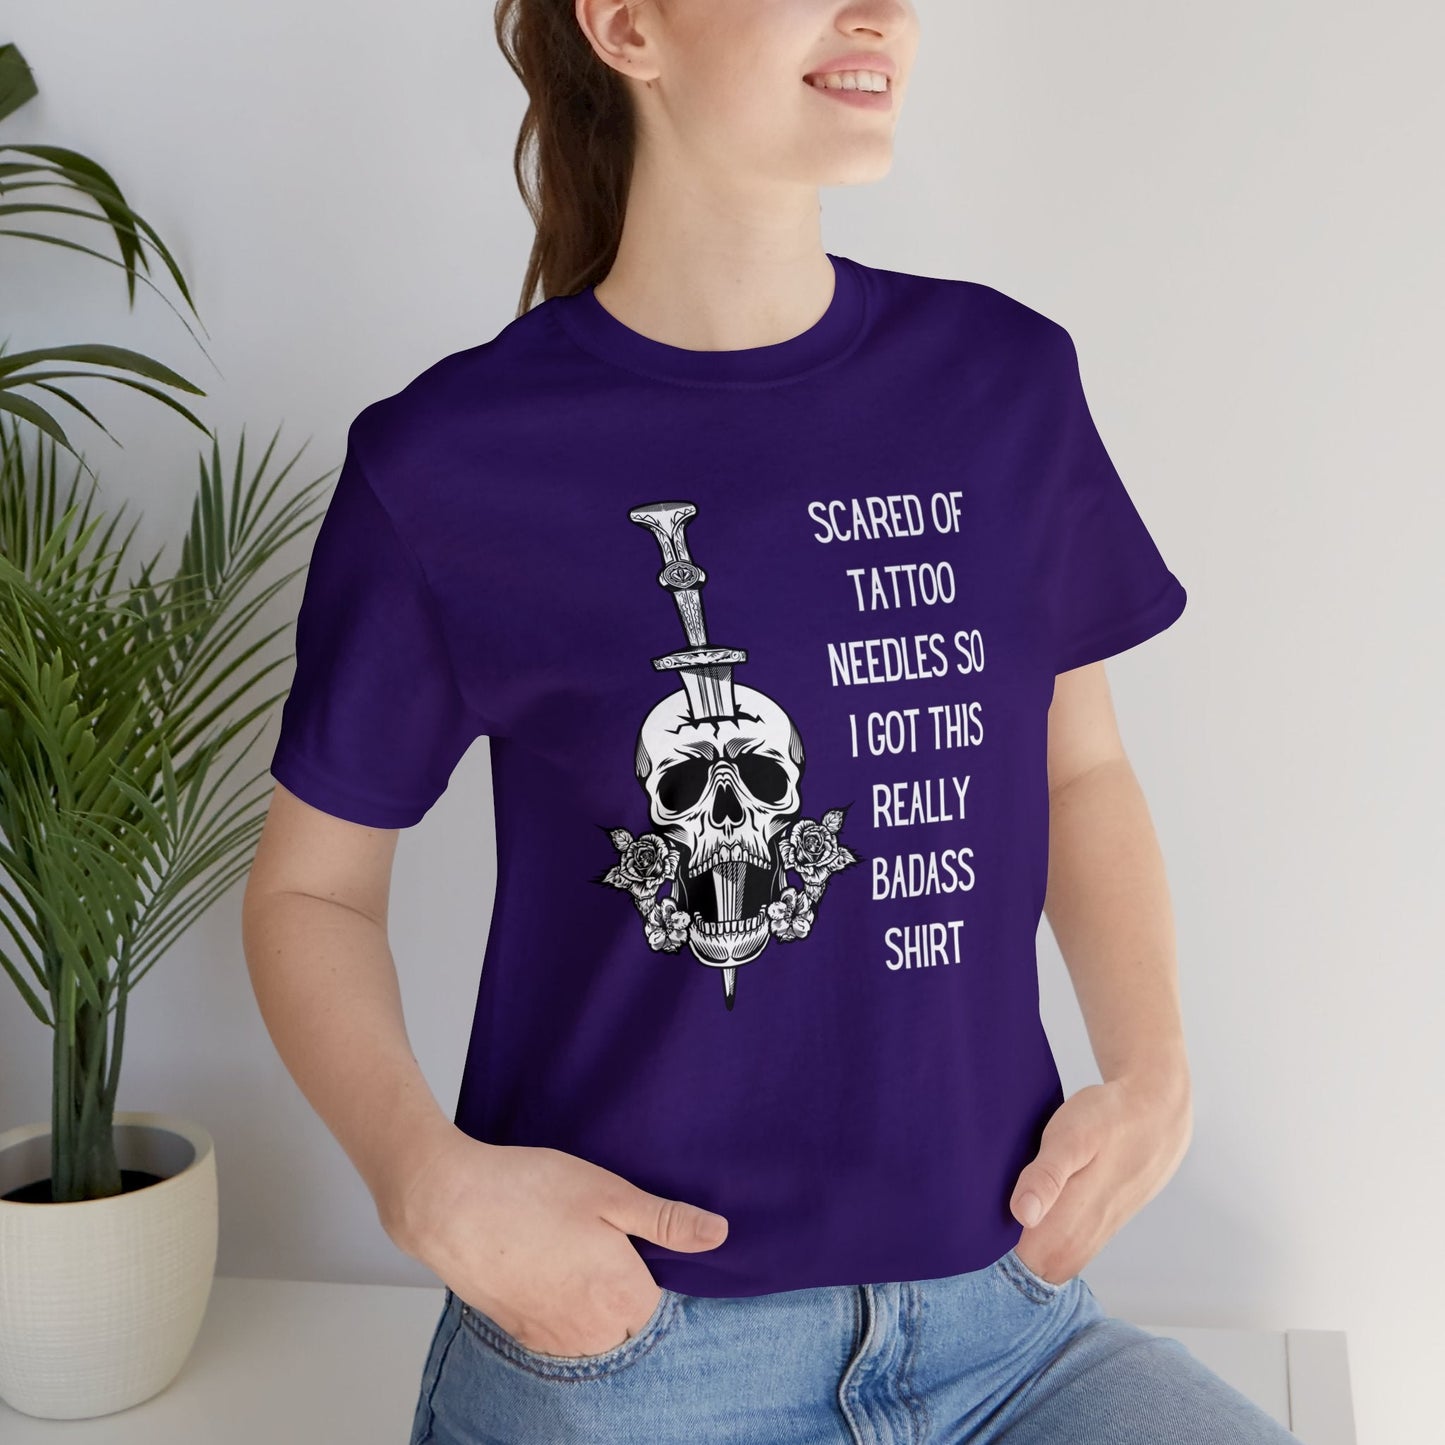 Scared of Tattoo Needles So I Got This Really Badass Shirt Jersey Short Sleeve Tee [Multiple Color Options]